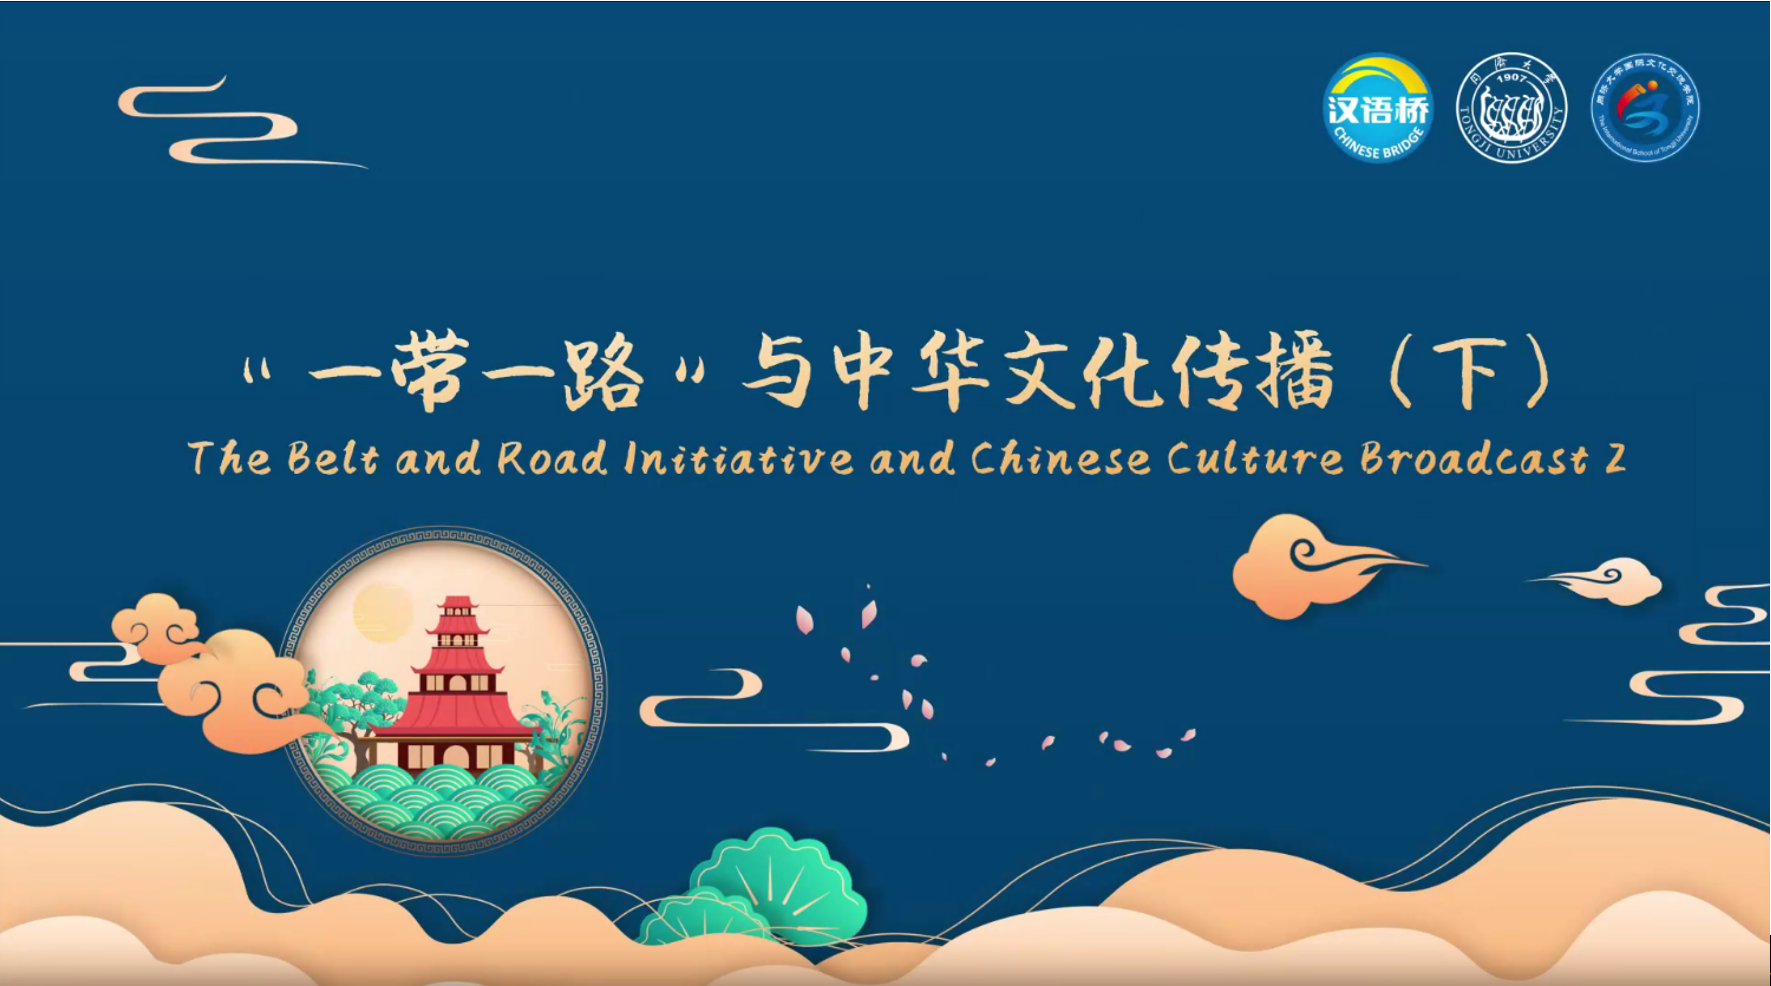 The Belt and Road Initiative and Chinese Culture Broadcast (2)